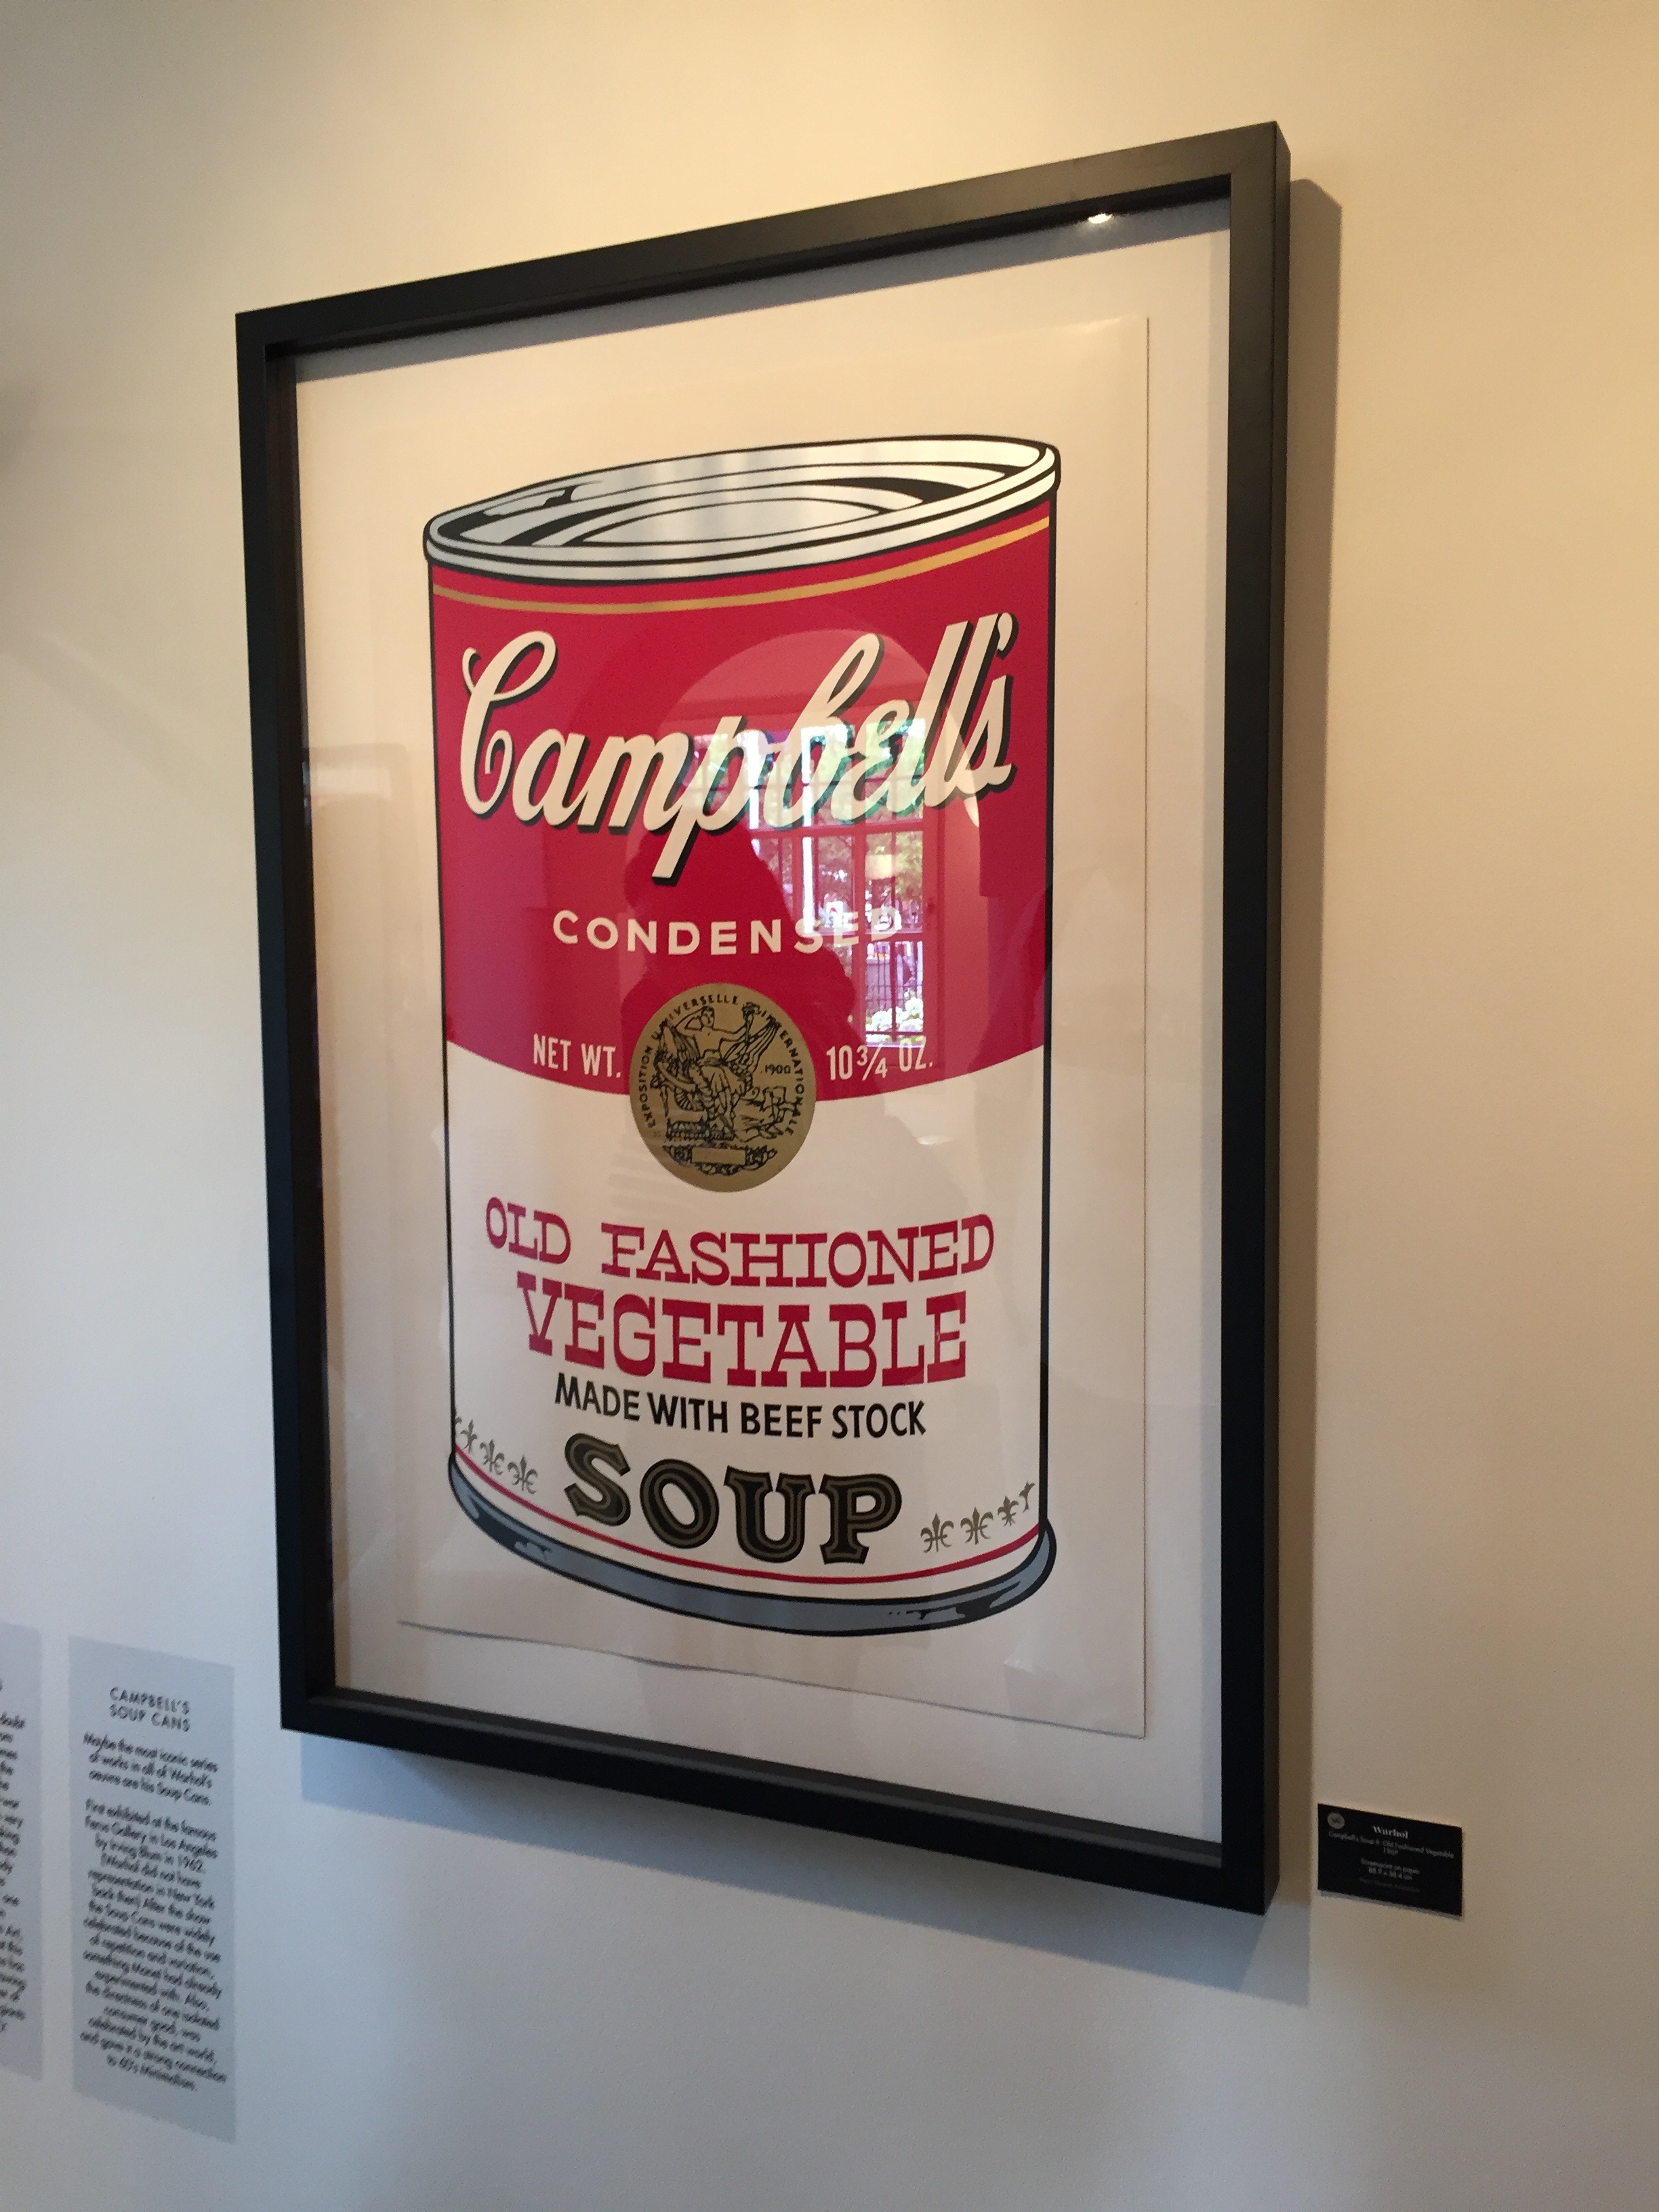 Warhol's Campbell's Soup framed poster inside the Moco Museum in Amsterdam